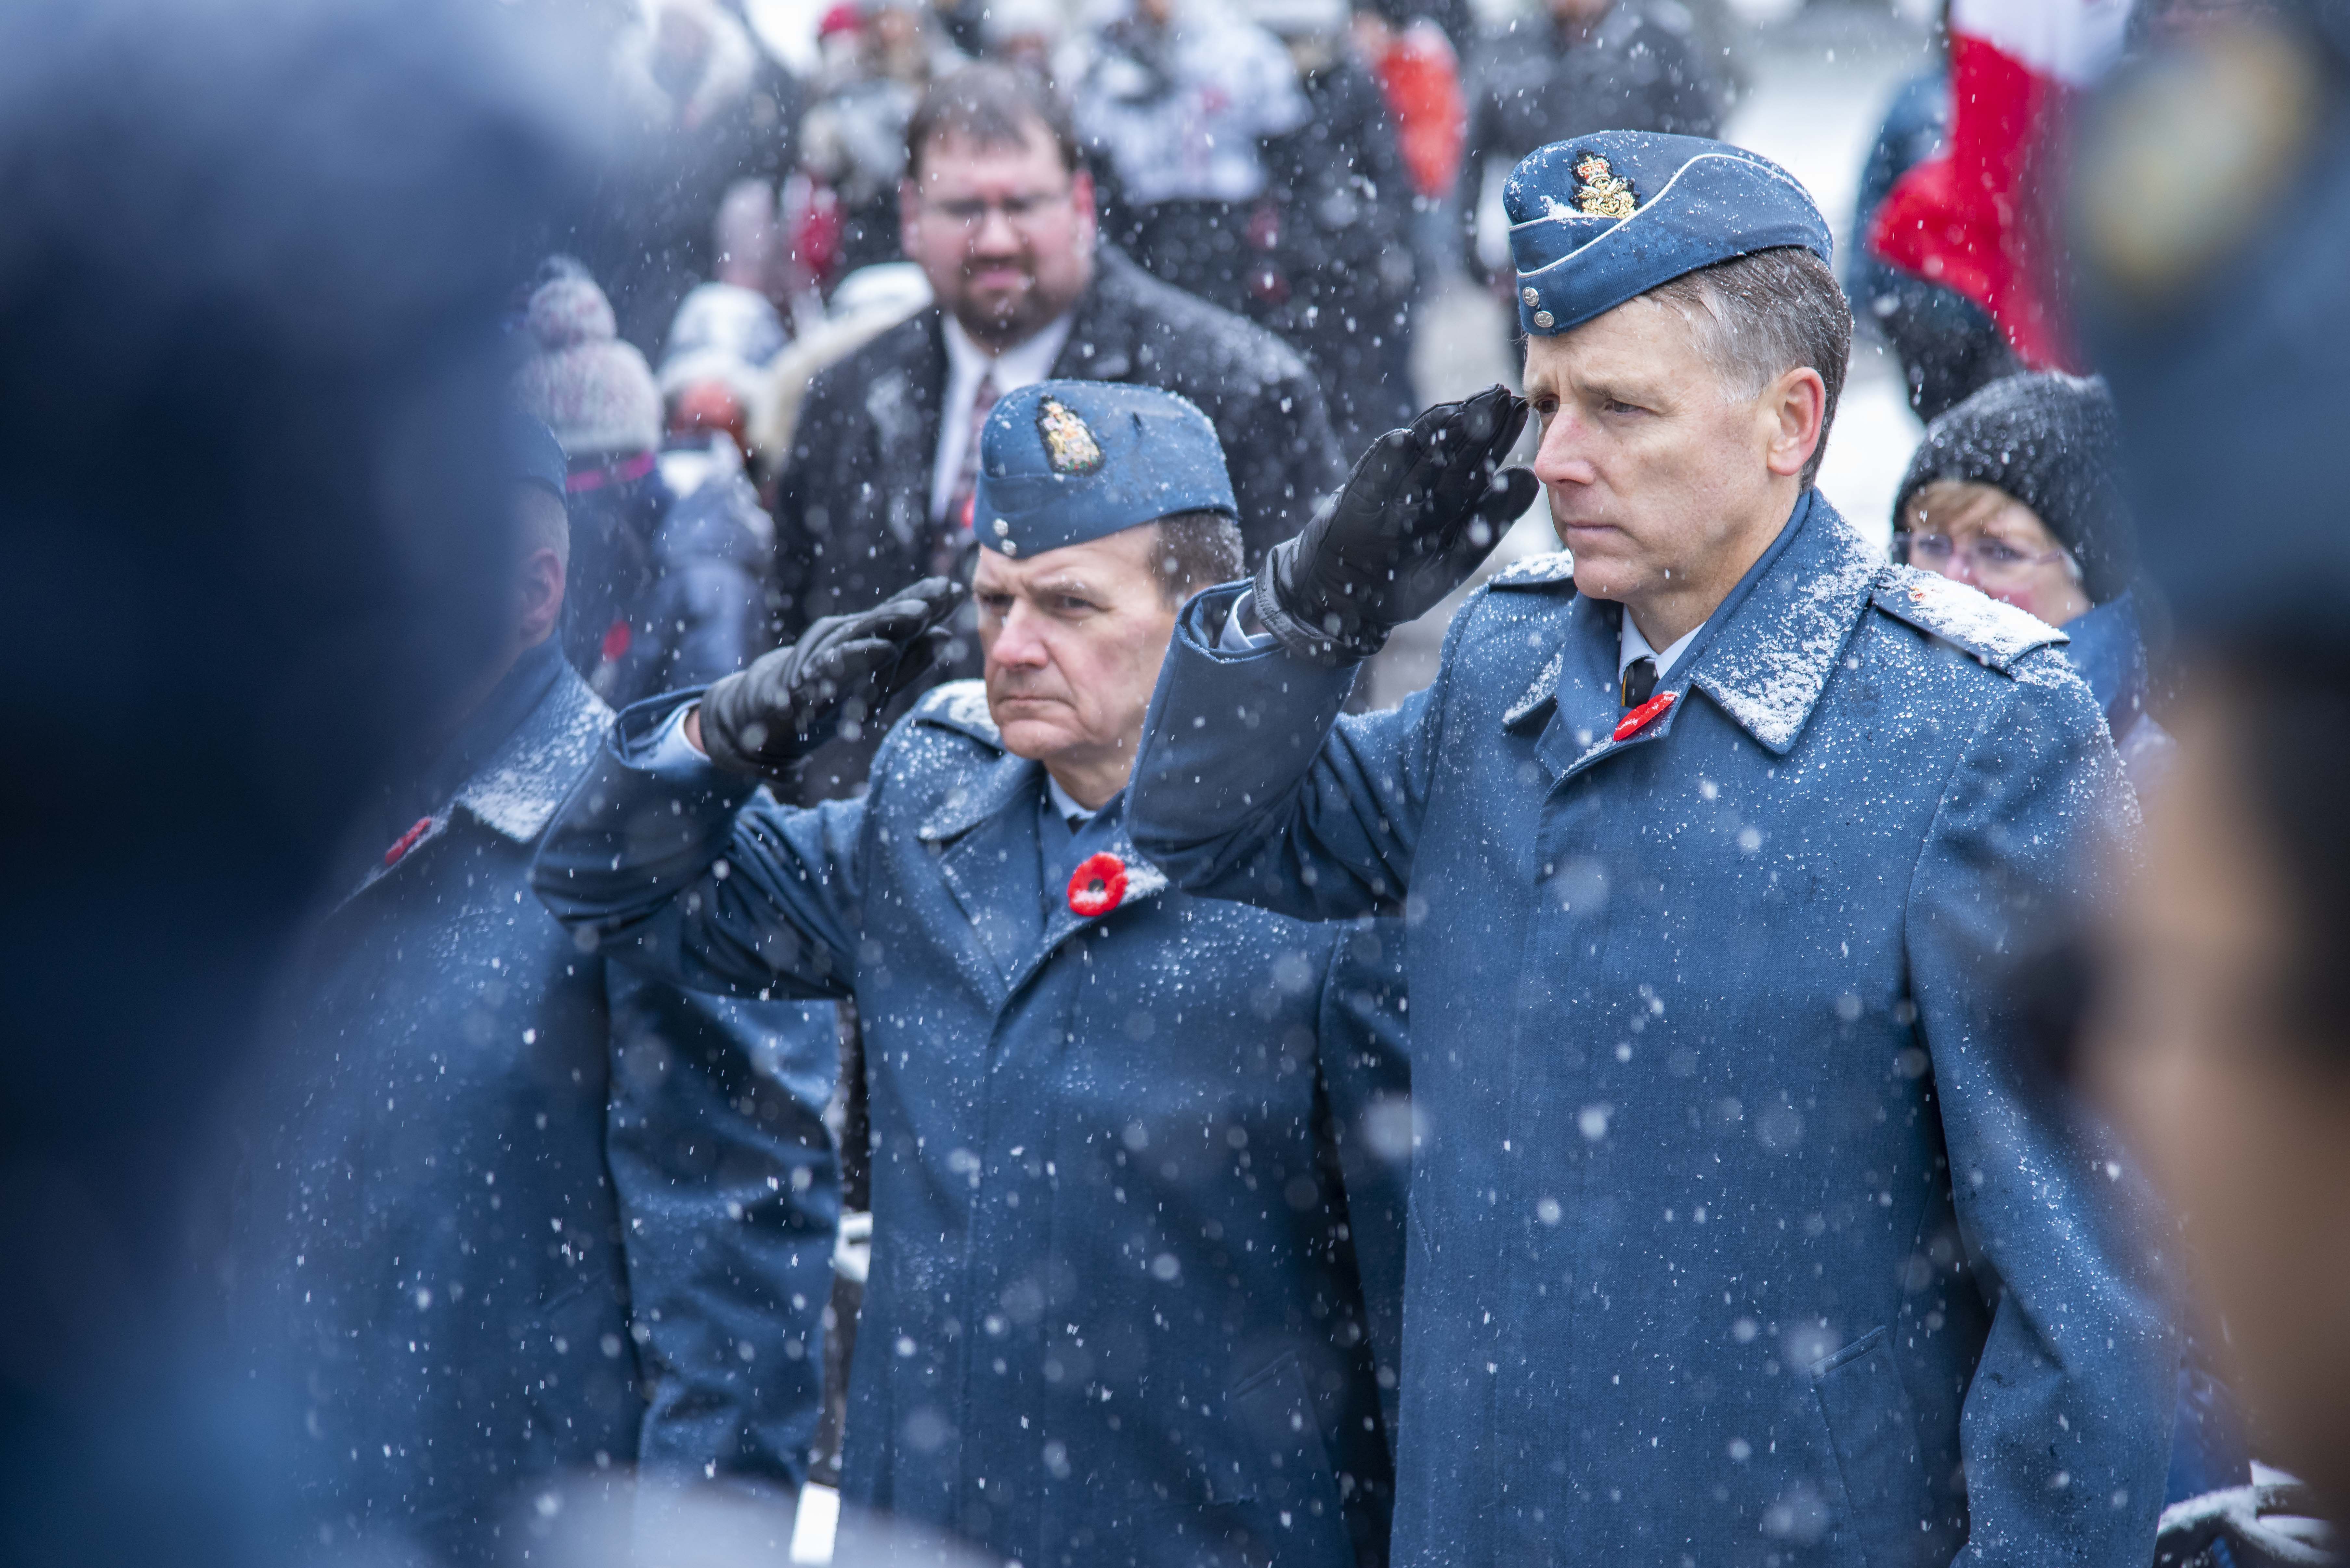 Chief Warrant Officer Denis Gaudreault (left), command chief warrant officer of the RCAF, and Lieutenant-General Al Meinzinger, commander of the RCAF, salute during the 2019 Remembrance Day ceremony held at the mausoleum where Wing Commander William Barker, VC, is interred in Mount Pleasant Cemetery, Toronto. PHOTO: Corporal Lynette Ai Dang, BM10-2019-0359-028